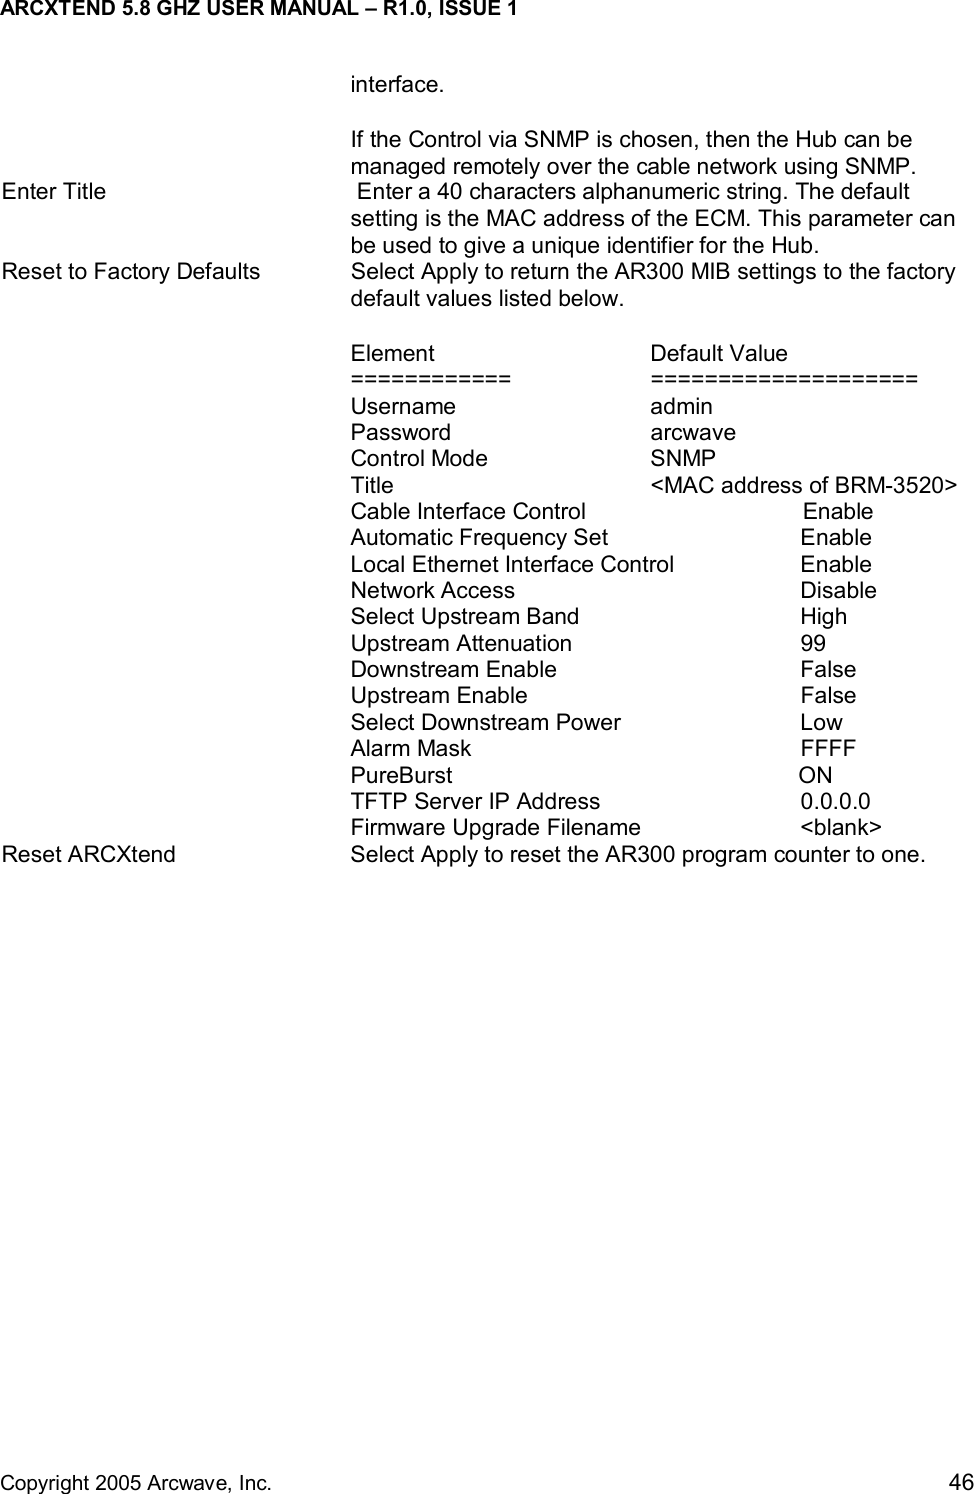 ARCXTEND 5.8 GHZ USER MANUAL – R1.0, ISSUE 1  Copyright 2005 Arcwave, Inc.    46 interface. If the Control via SNMP is chosen, then the Hub can be managed remotely over the cable network using SNMP.  Enter Title   Enter a 40 characters alphanumeric string. The default setting is the MAC address of the ECM. This parameter can be used to give a unique identifier for the Hub.  Reset to Factory Defaults  Select Apply to return the AR300 MIB settings to the factory default values listed below. Element   Default Value ============   ==================== Username   admin Password   arcwave Control Mode   SNMP Title    &lt;MAC address of BRM-3520&gt; Cable Interface Control                                  Enable Automatic Frequency Set       Enable Local Ethernet Interface Control    Enable Network Access    Disable Select Upstream Band      High Upstream Attenuation    99 Downstream Enable    False Upstream Enable    False Select Downstream Power      Low Alarm Mask     FFFF PureBurst                                       ON TFTP Server IP Address      0.0.0.0 Firmware Upgrade Filename      &lt;blank&gt; Reset ARCXtend  Select Apply to reset the AR300 program counter to one.   